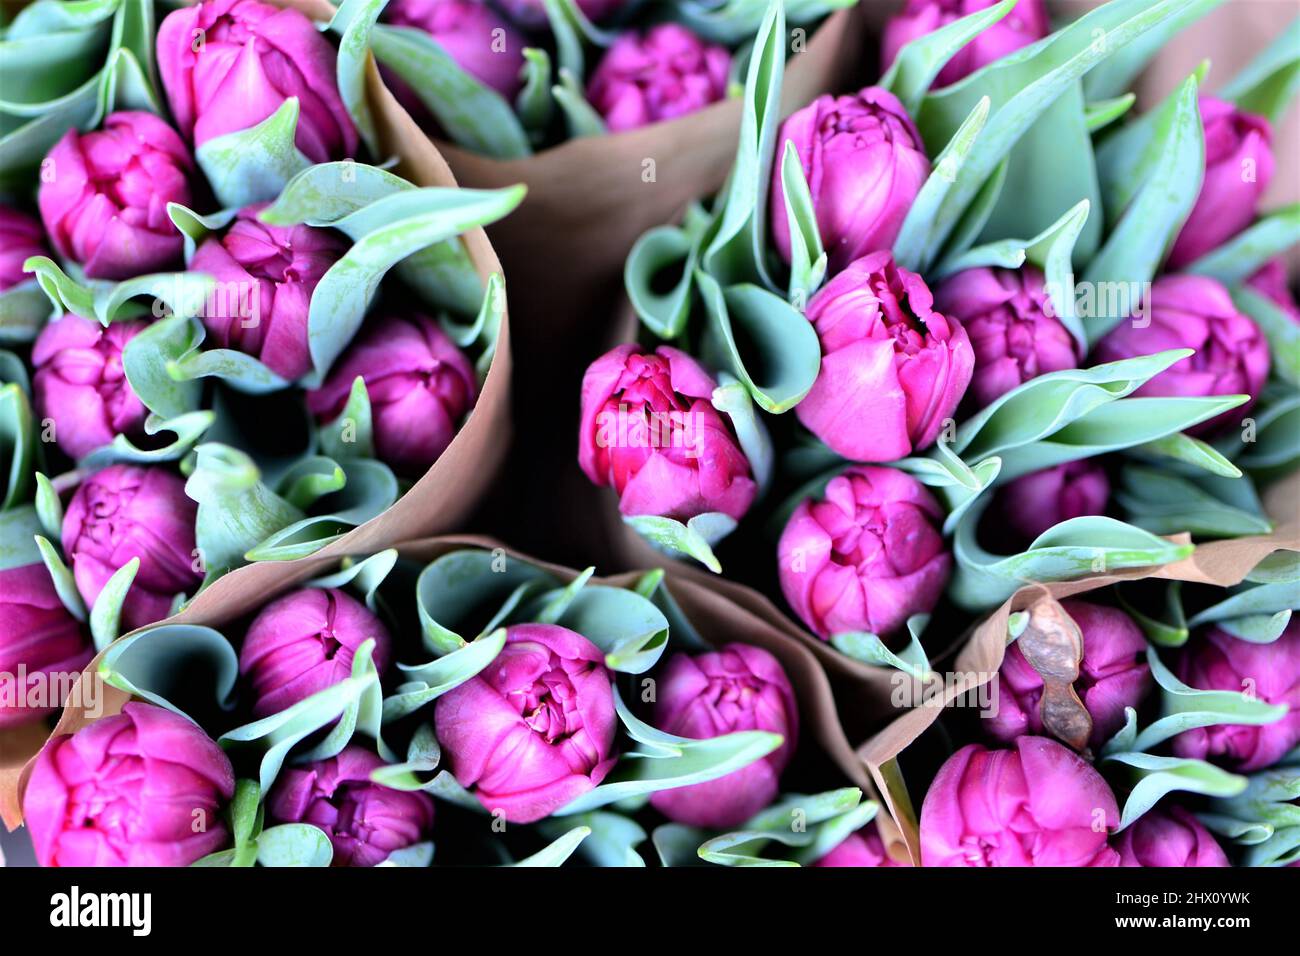 Close up of purple tulips from above Stock Photo